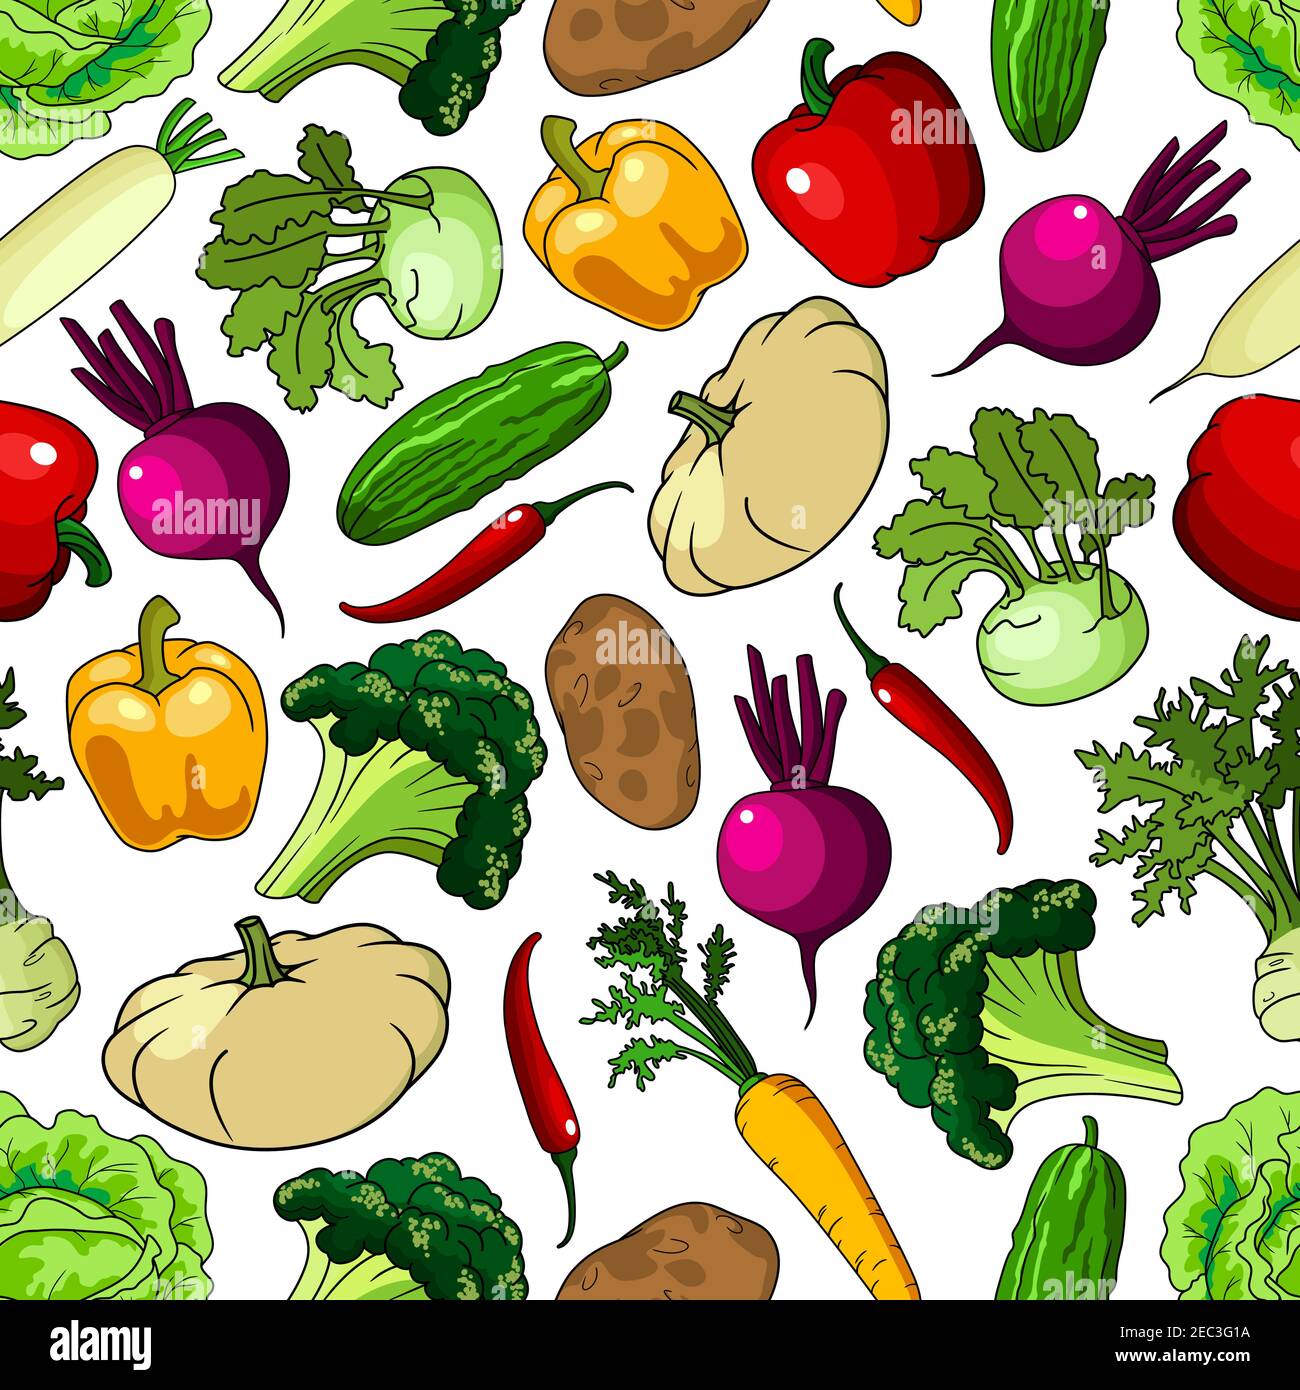 Bright background with seamless pattern of fresh picked broccoli and cabbages, cucumbers and potatoes, chili and bell peppers, beetroots and carrots, Stock Vector